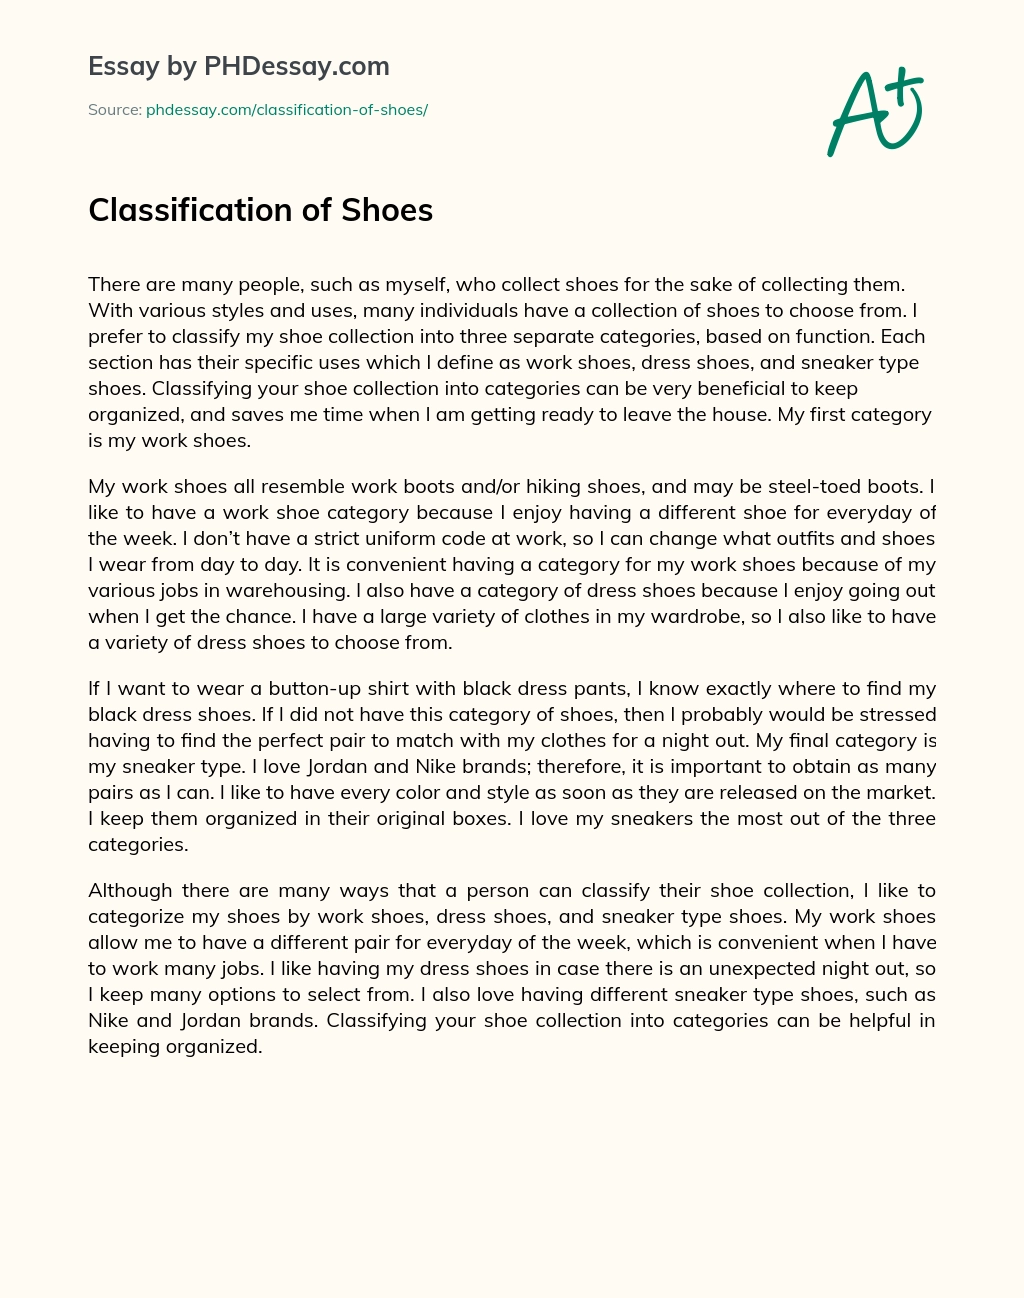 Classification of Shoes